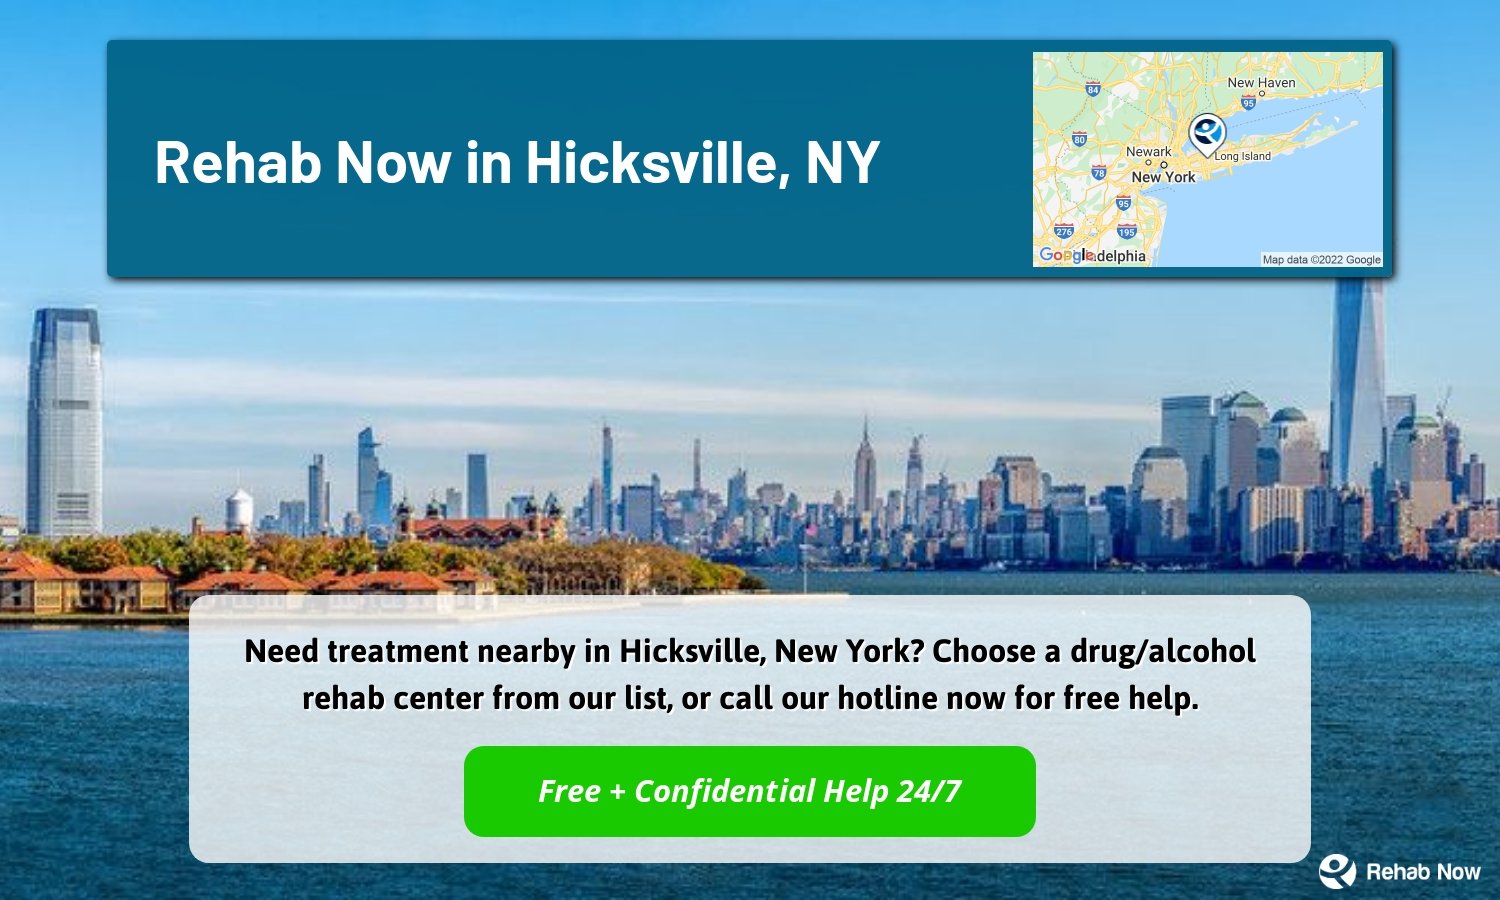 Need treatment nearby in Hicksville, New York? Choose a drug/alcohol rehab center from our list, or call our hotline now for free help.